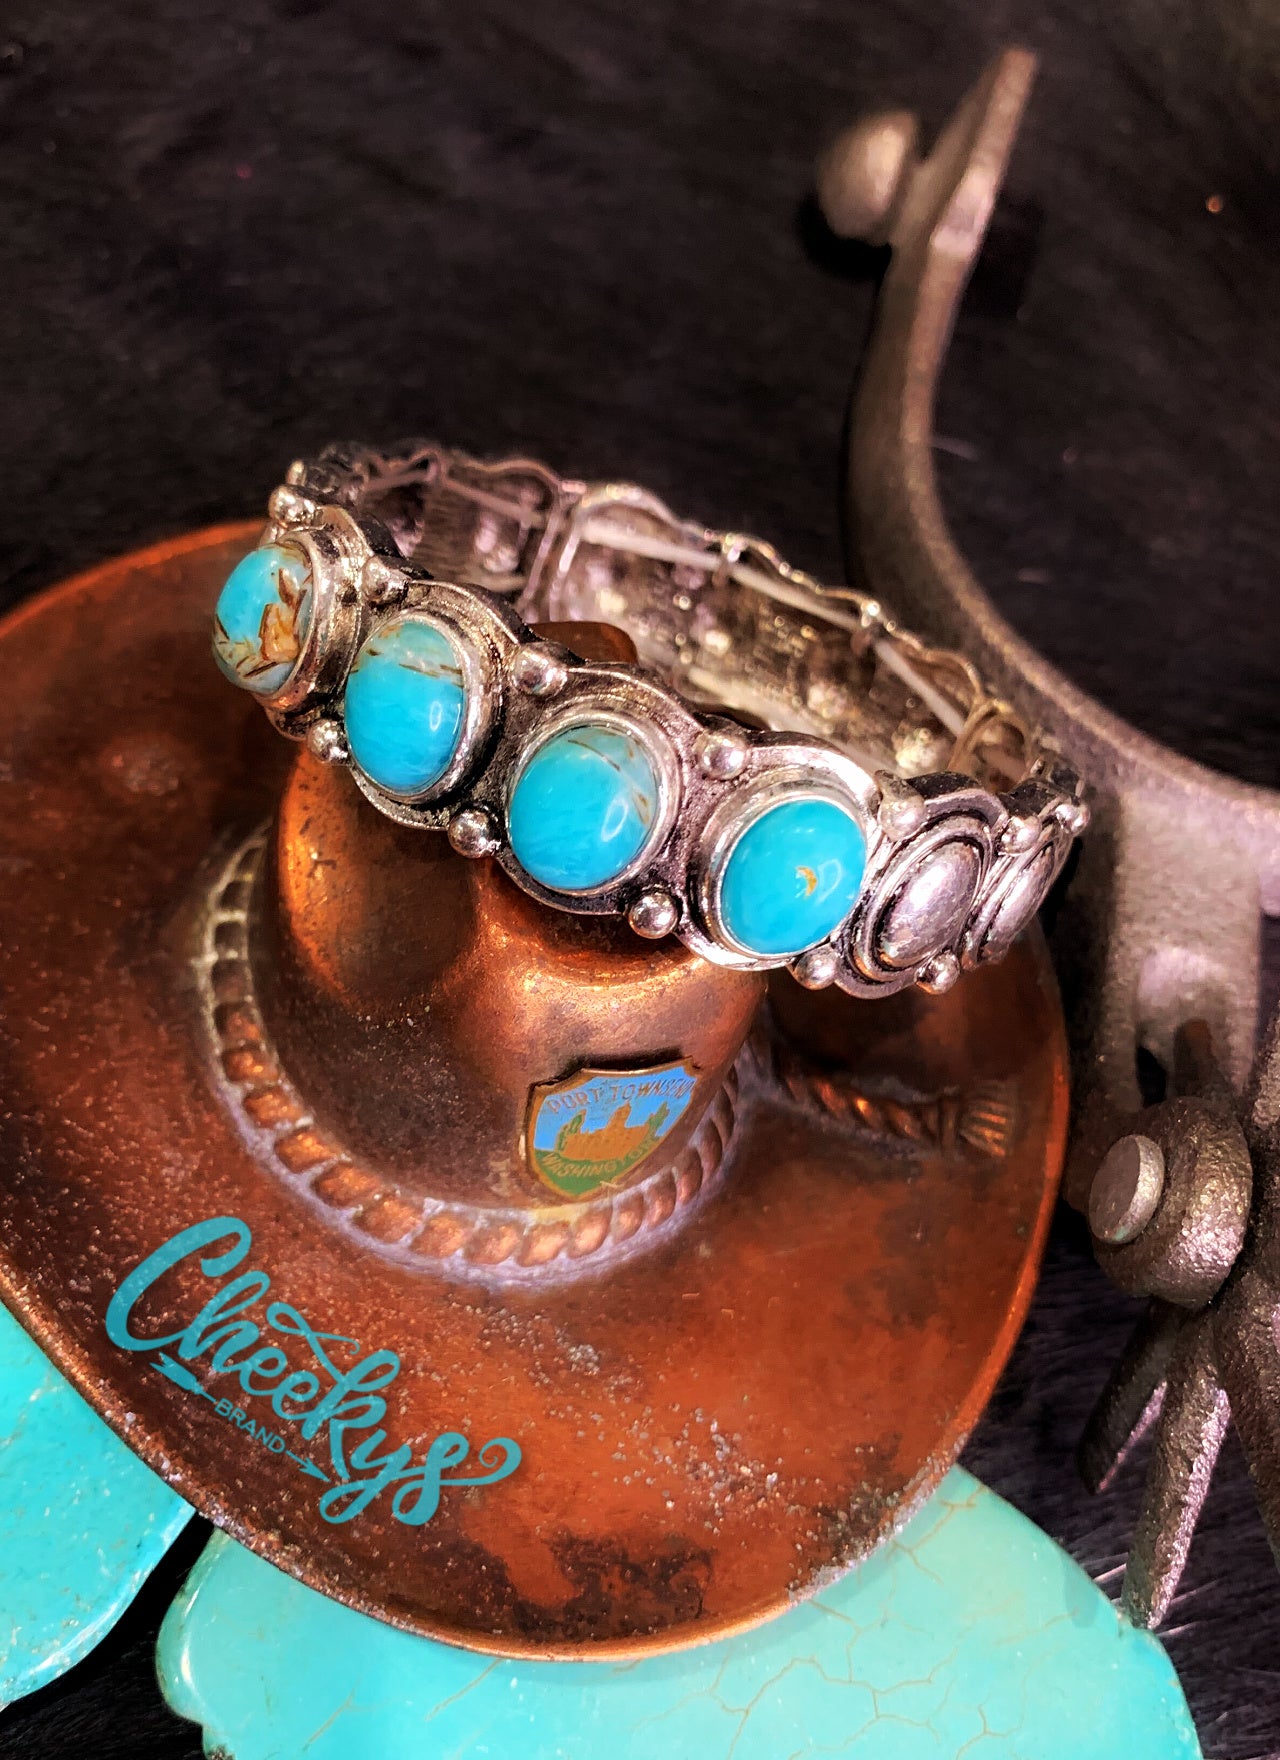 The Arabella Stretch Bracelet in Turquoise Jewelry 19 